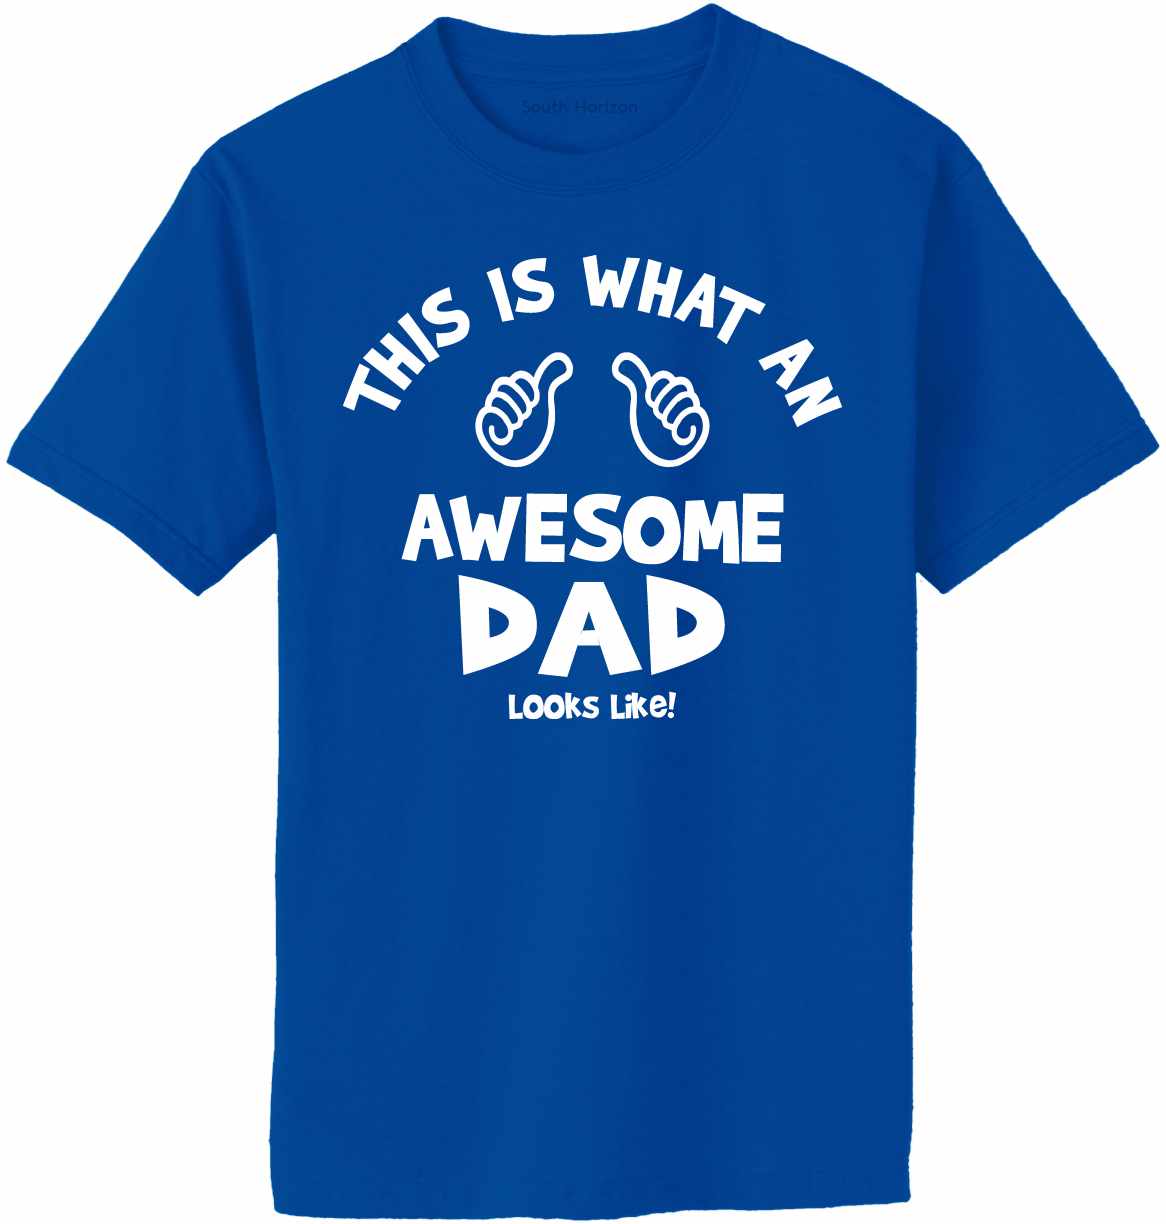 This Is What An Awesome DAD Look Like Adult T-Shirt